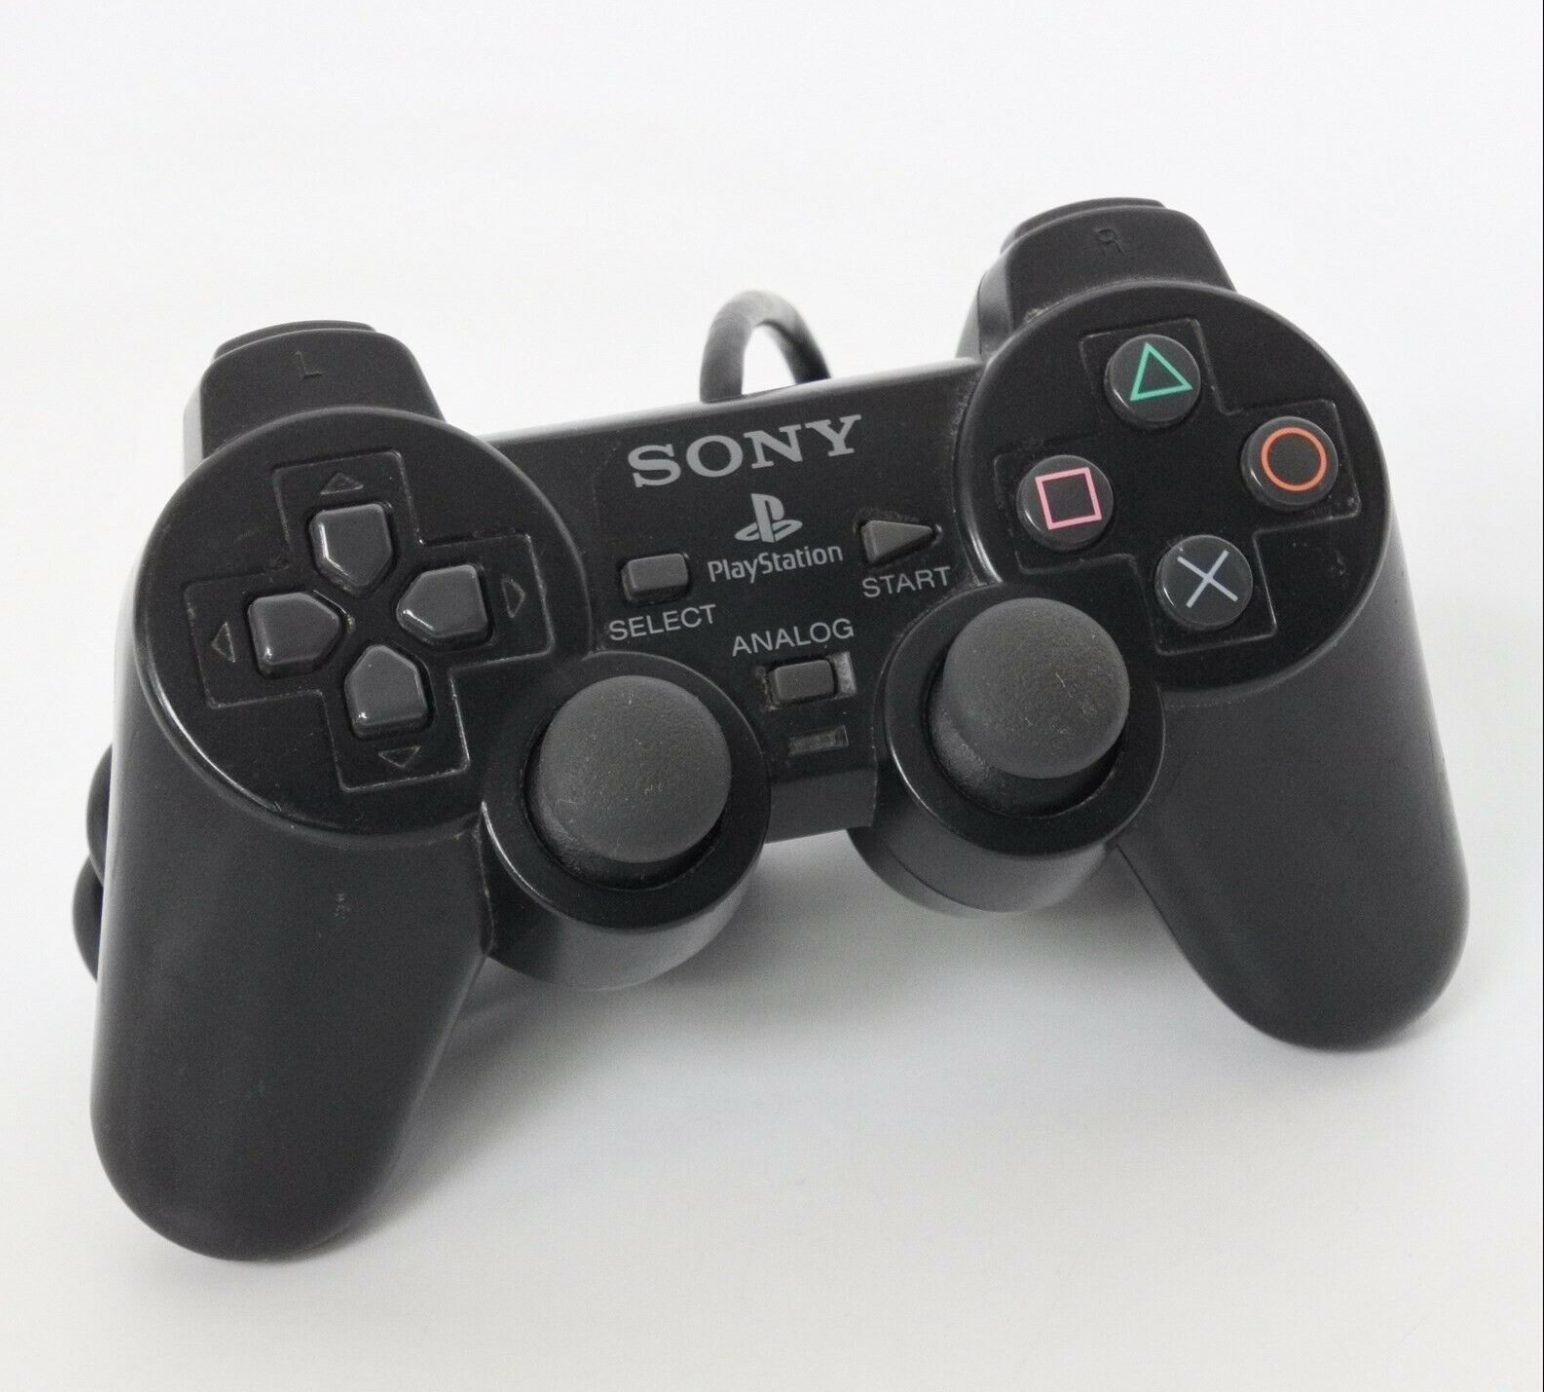 PS2 Controller Analog Used Playstation Sony Black Wired Authentic